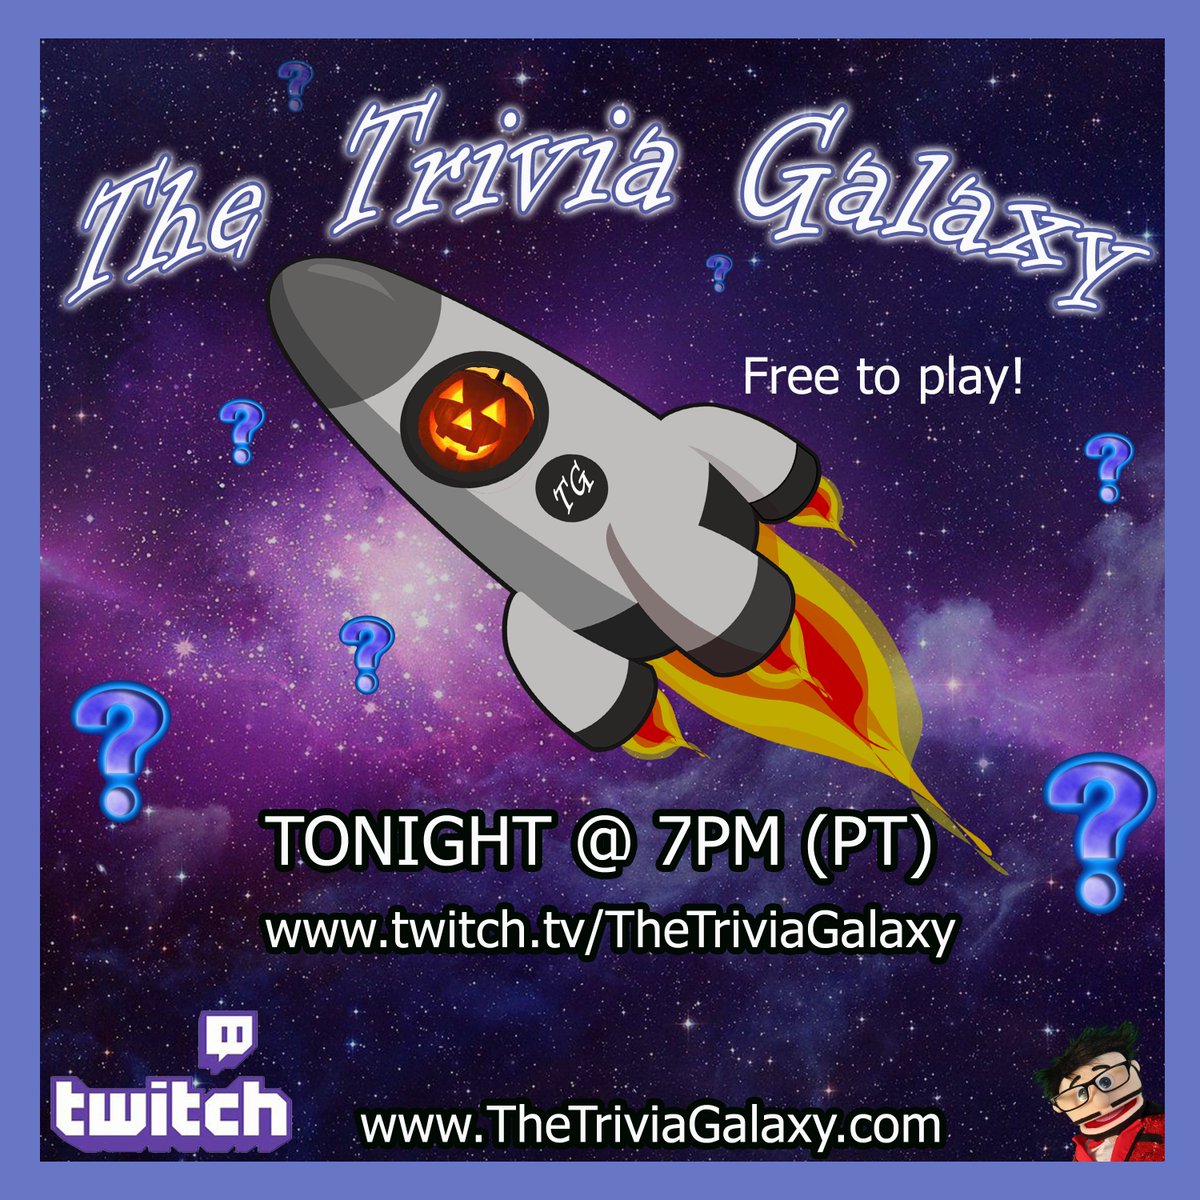 Happy October! #thetriviagalaxy is back tonight and we're going to have some funky fun as we take a trip to the pumpkin patch before settling in for some good old fashioned spy films.

Submit your answers: forms.gle/ENddMgkw7TReSa…

#trivianight #trivia #quiz #spyfilms #funsongs